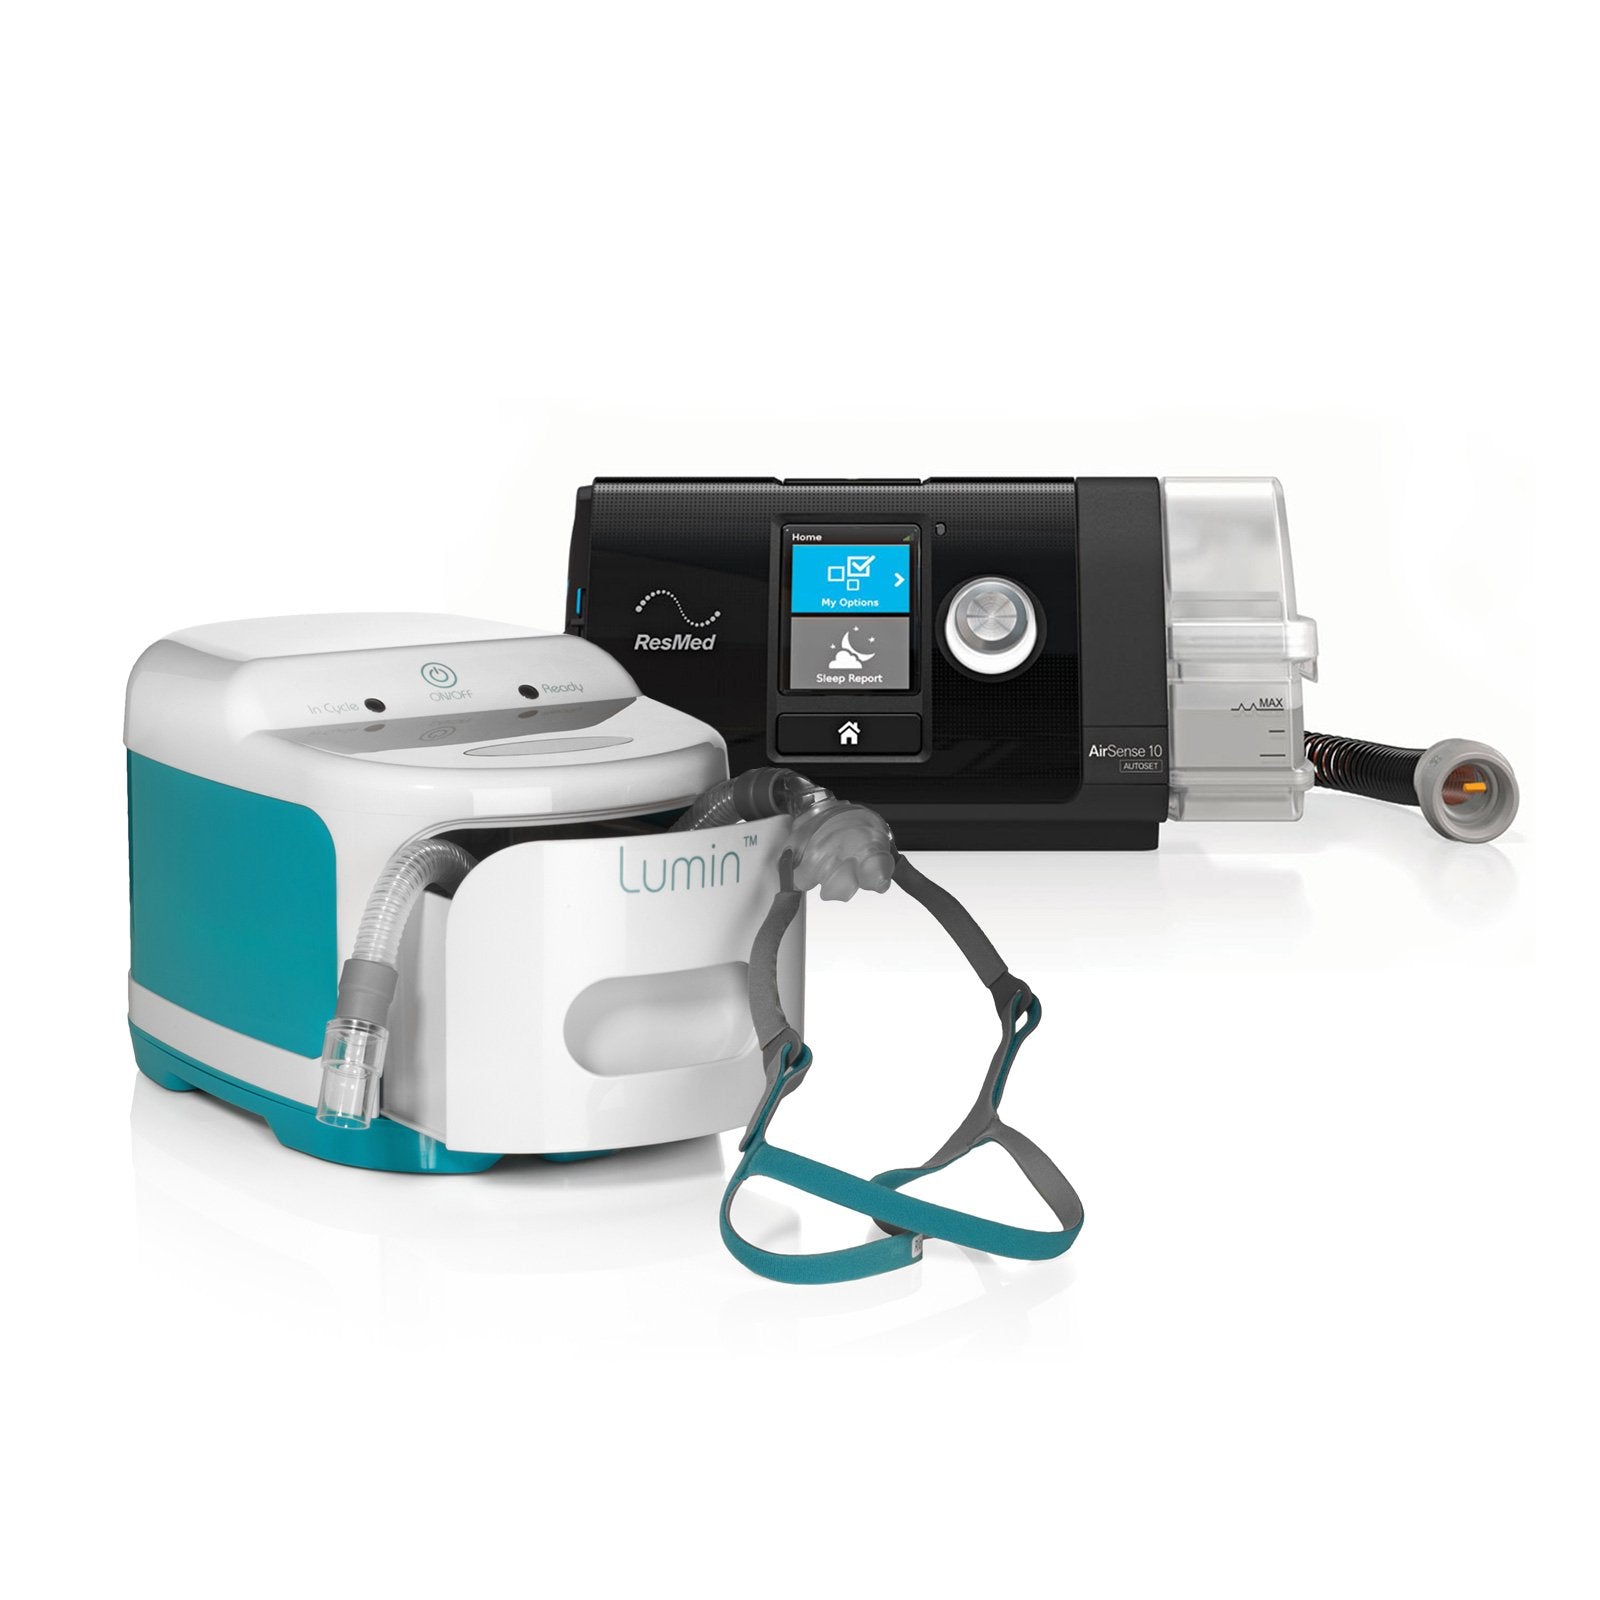 Lumin UVC CPAP Disinfecting System